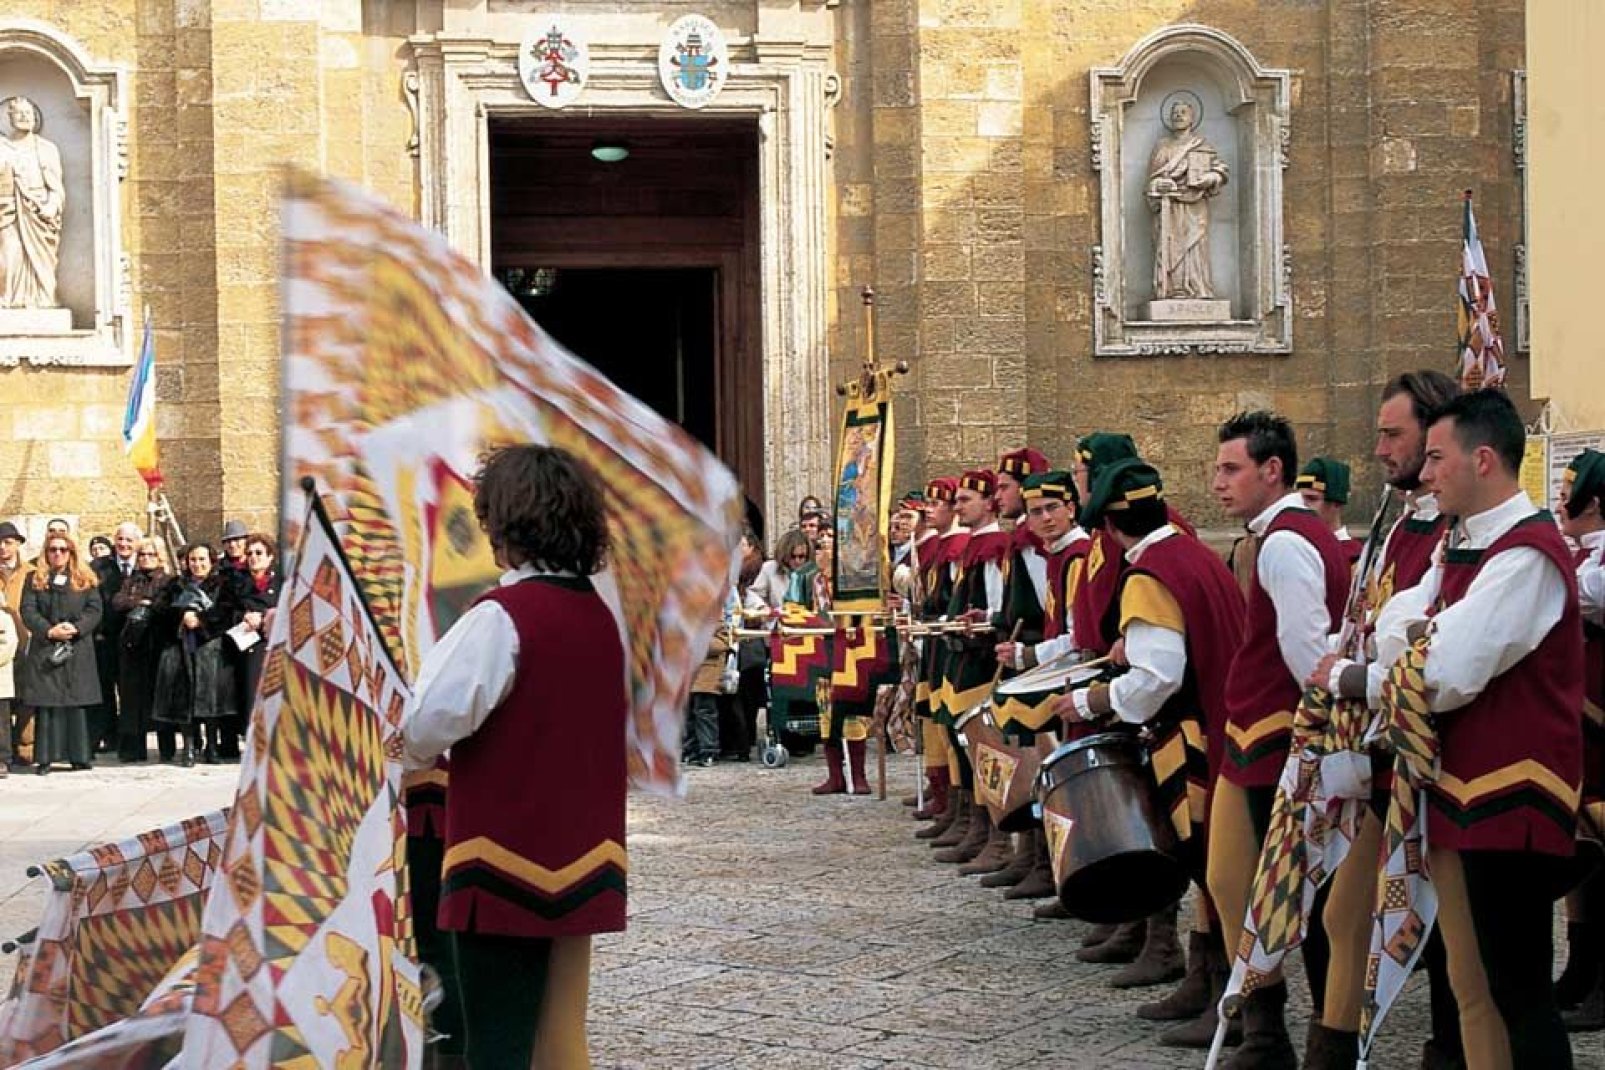 Traditions and folklore still have strong roots in Brindisi. For instance, the worship of tarantism is still practiced